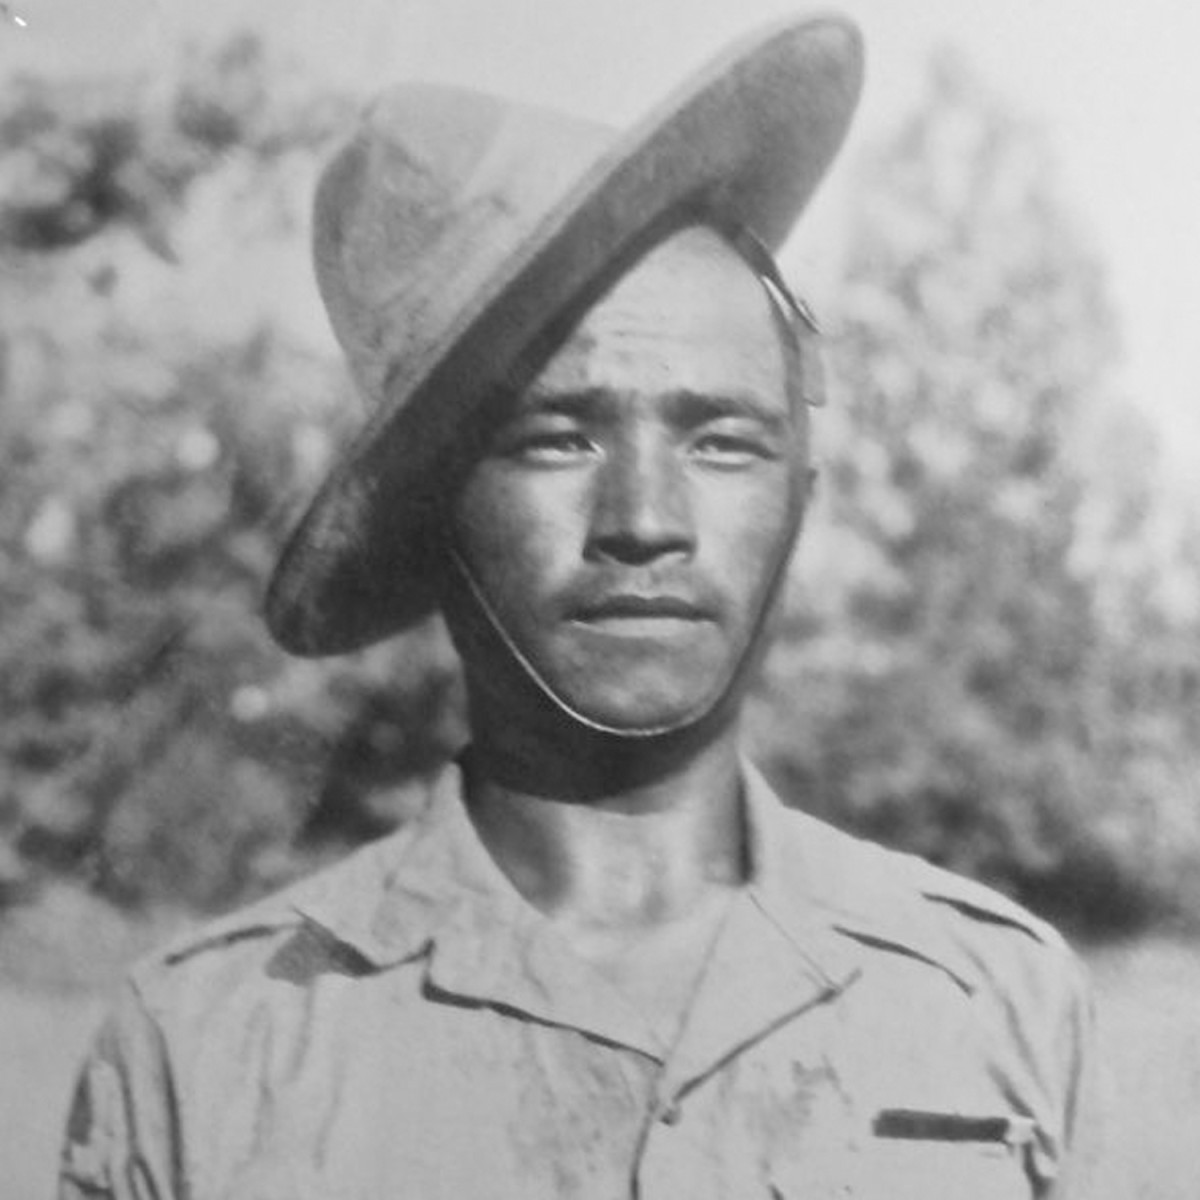 In 1940, Lachhiman tried to join the British Indian Army but he was rejected because he stood a mere 4’11” tall which was far below the military standards of recruitment.